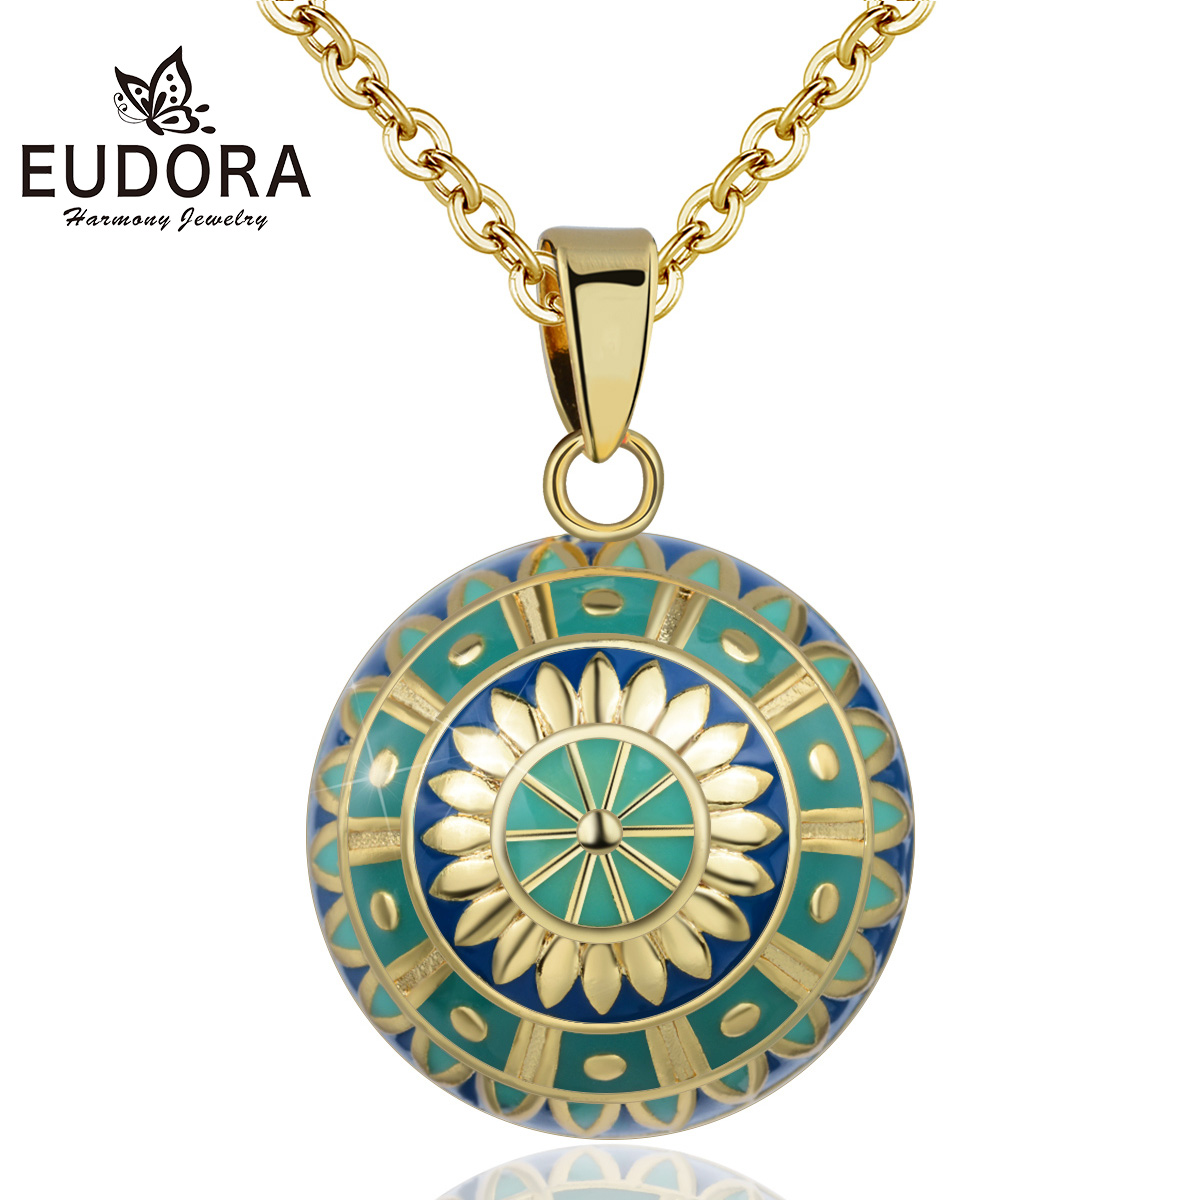 Eudora Green Harmony Pregnancy ball Necklace Pregnancy bola ball pendant with Sun Flower Luxury Jewelry for Women Shower gift 1